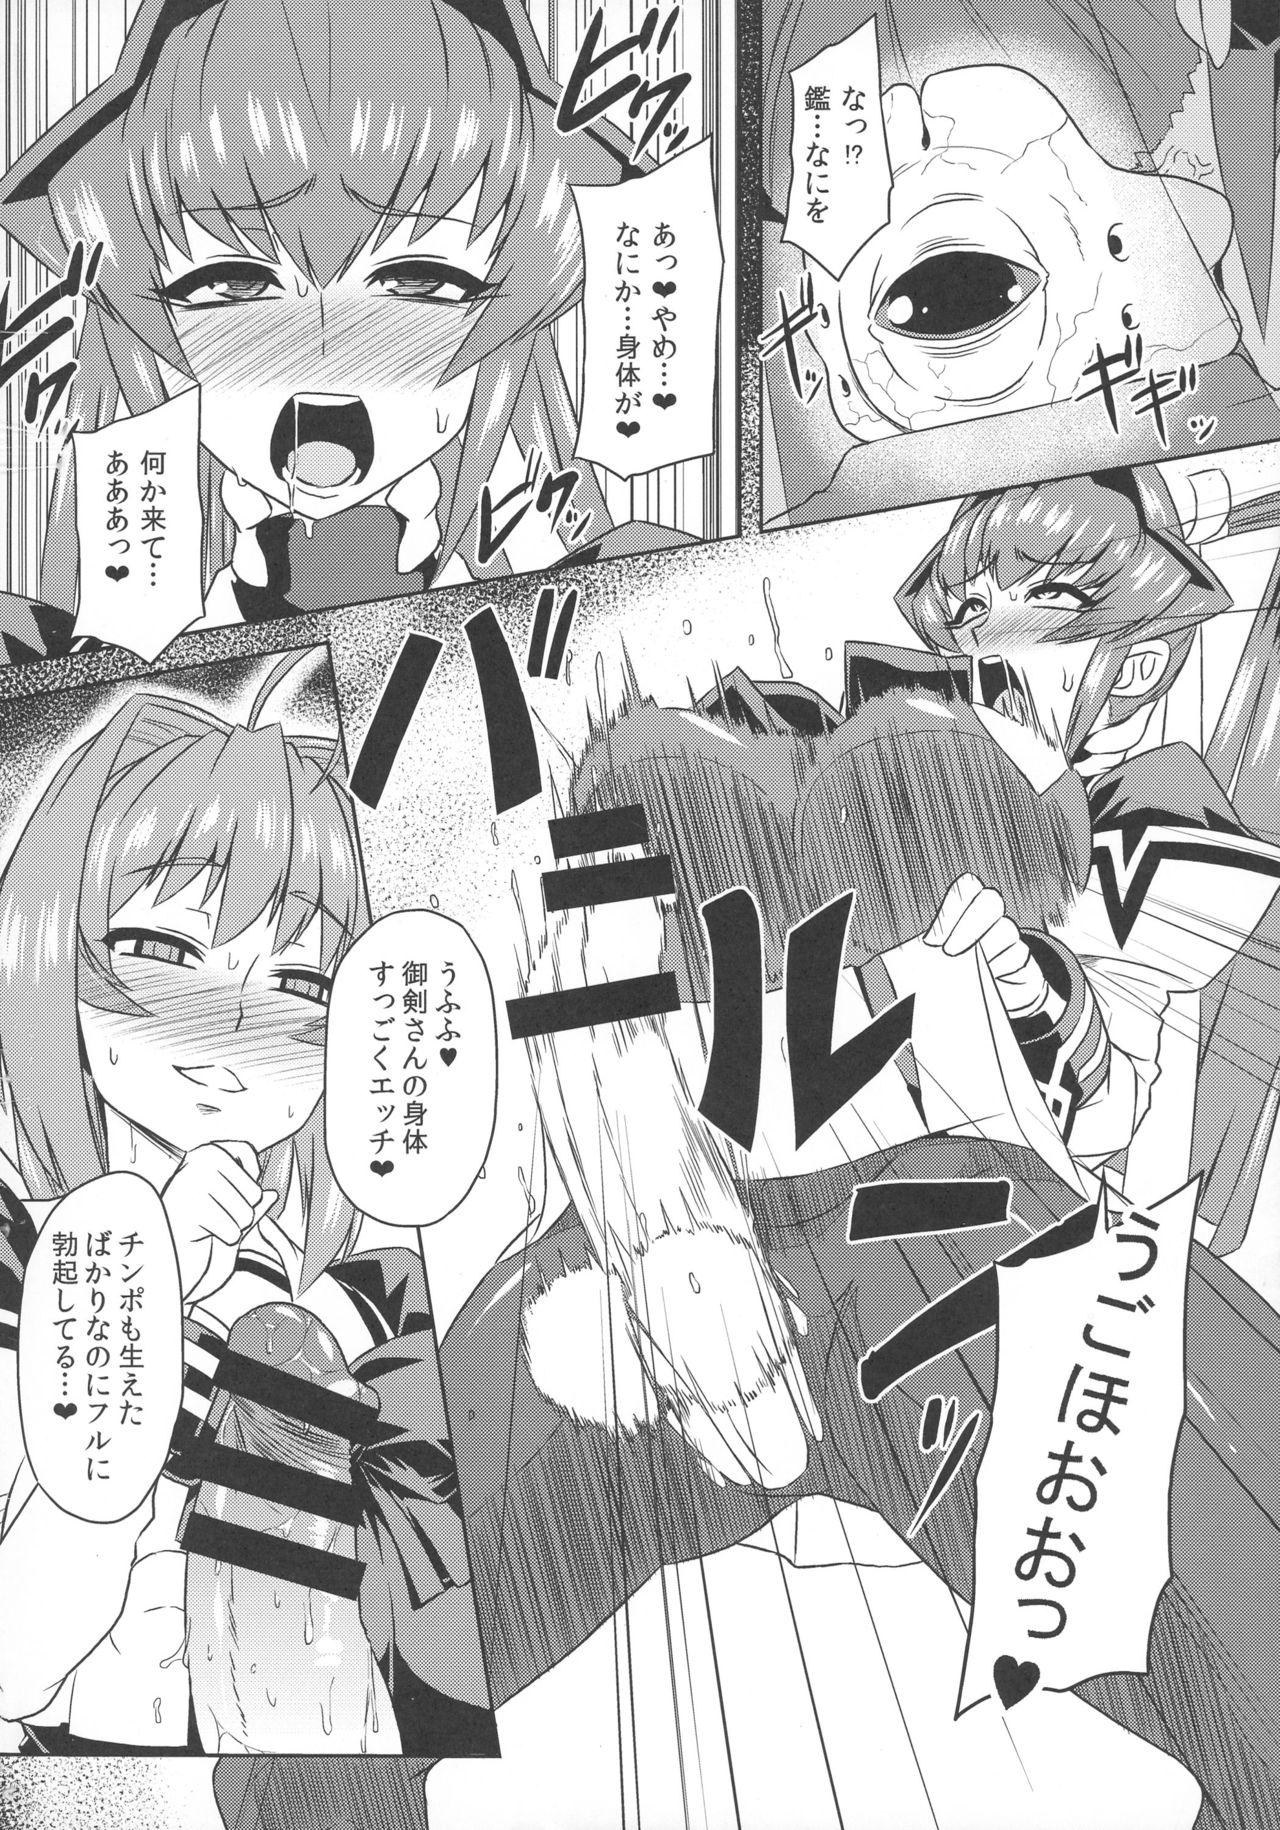 Wet Cunts Muv-kai!! - Muv-luv Tied - Page 6